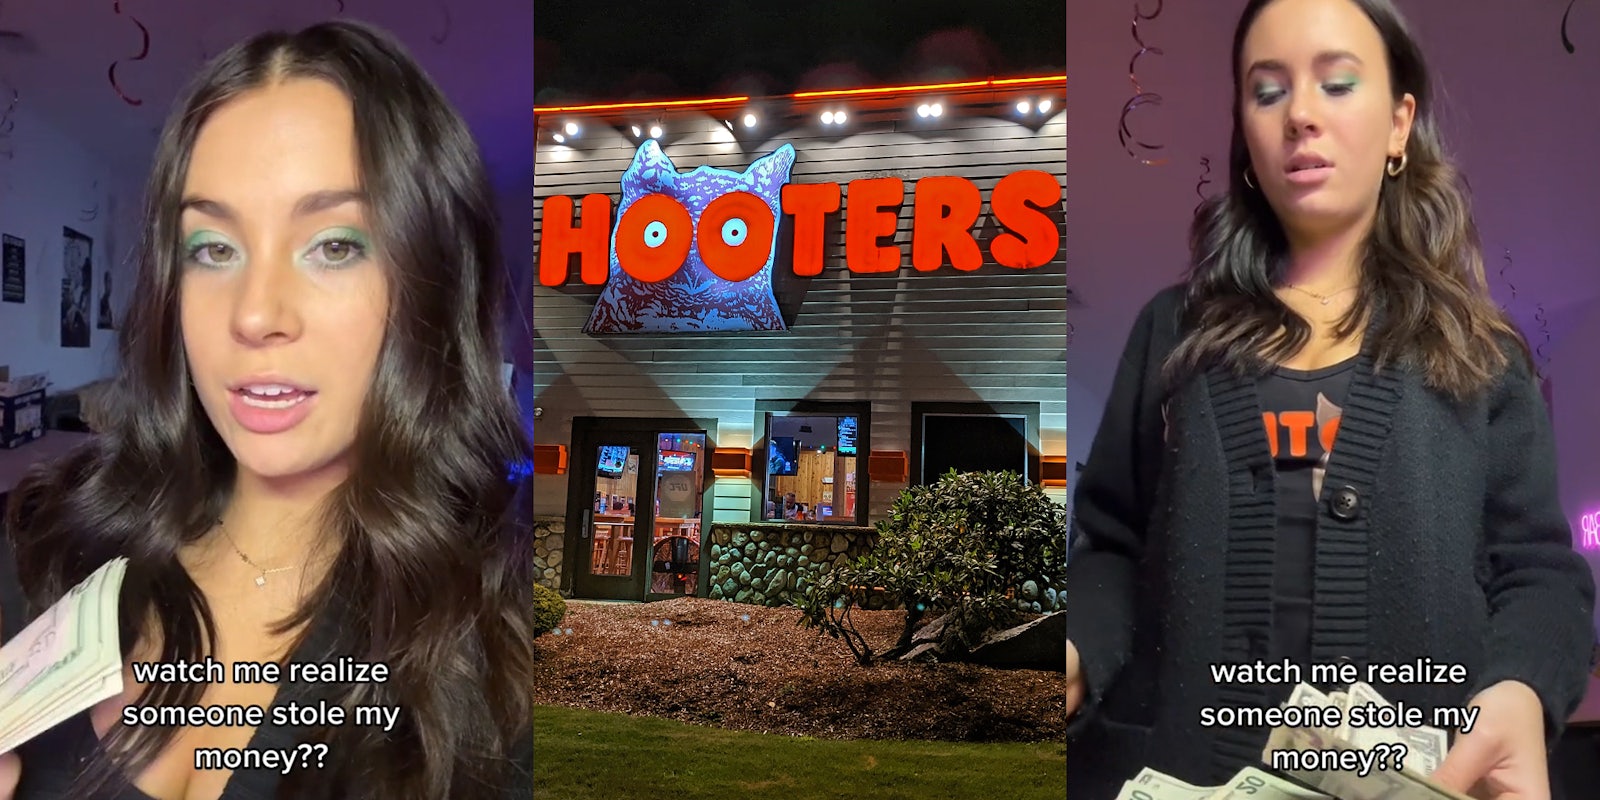 Hooter's server speaking holding cash with caption 'watch me realize someone stole my money??' (l) Hooter's building with sign at night (c) Hooter's server speaking holding cash with caption 'watch me realize someone stole my money??' (r)